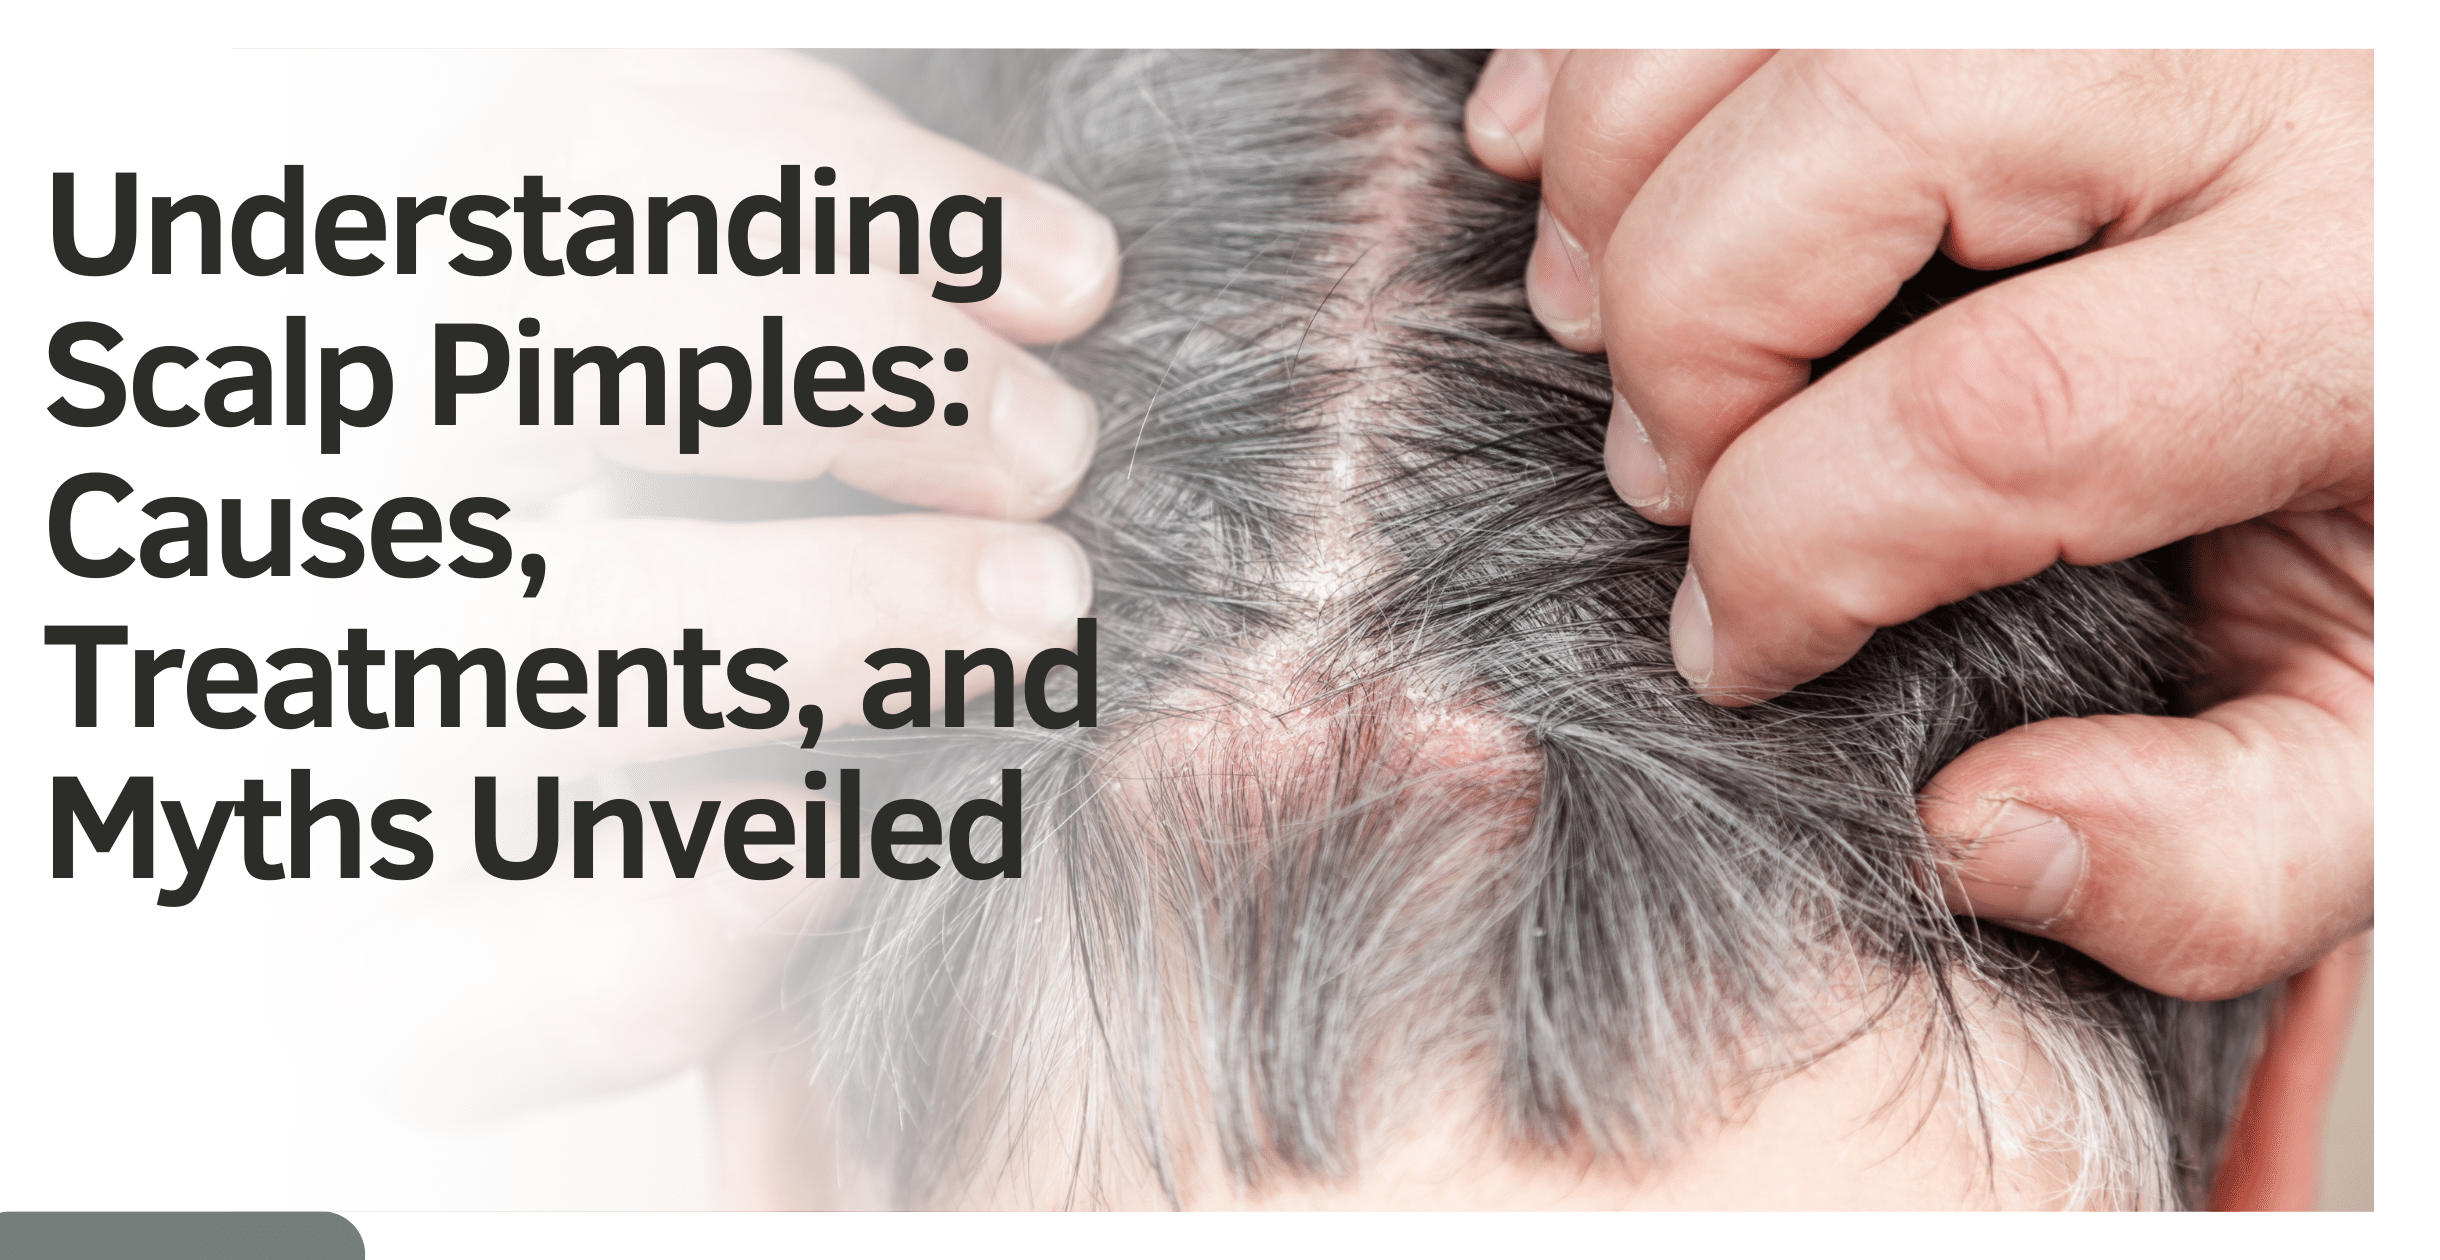 Understanding Scalp Pimples: Causes, Treatments, and Myths Unveiled